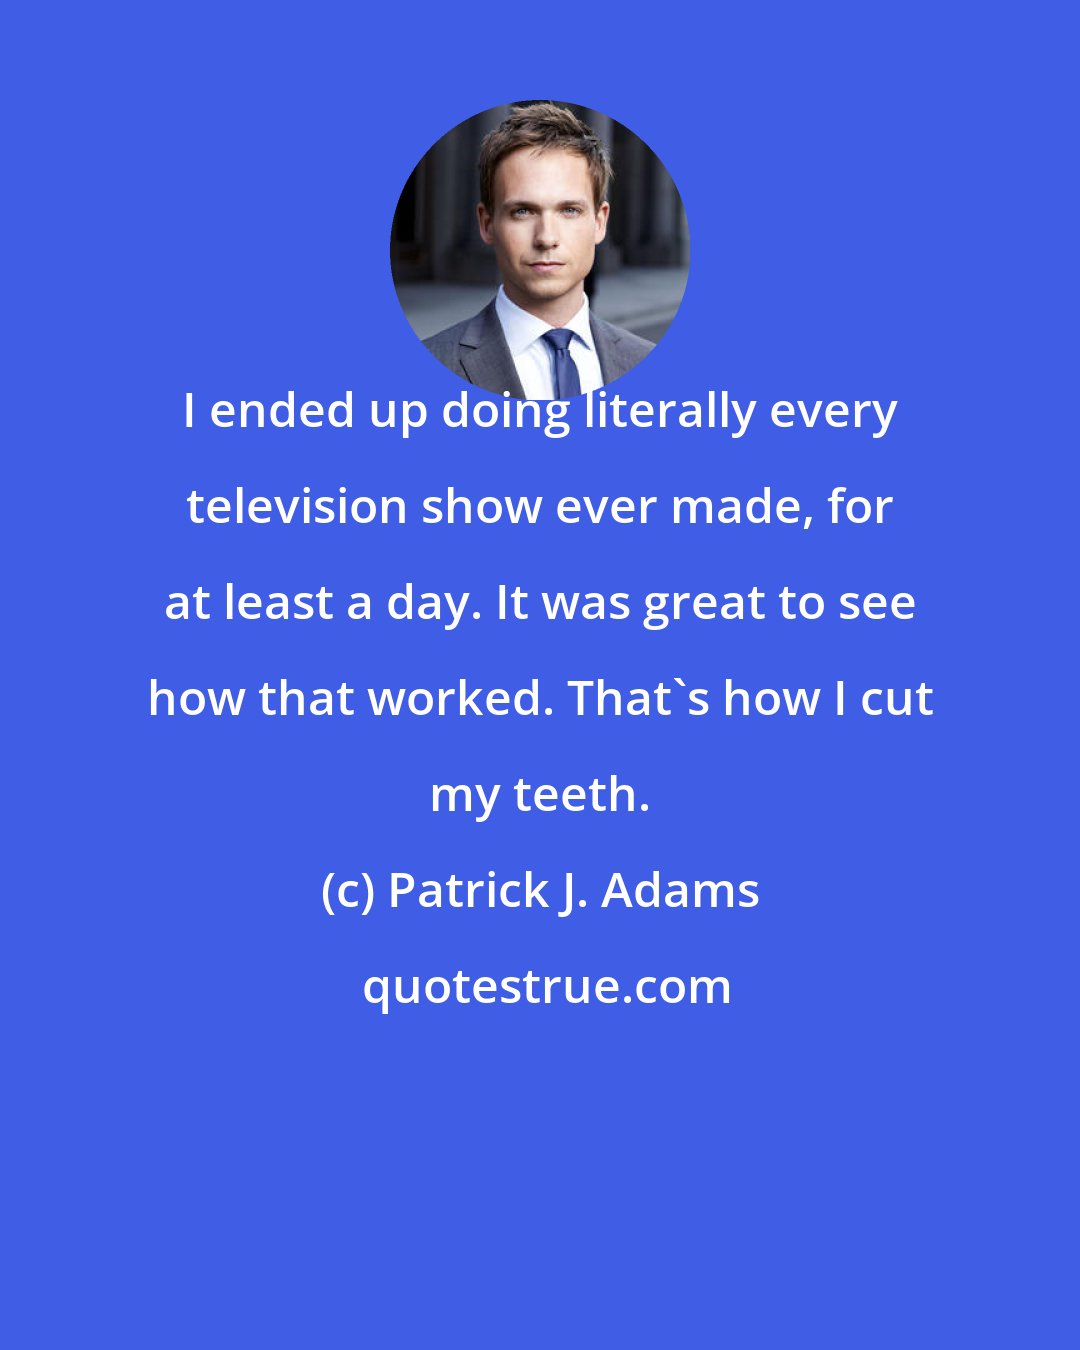 Patrick J. Adams: I ended up doing literally every television show ever made, for at least a day. It was great to see how that worked. That's how I cut my teeth.